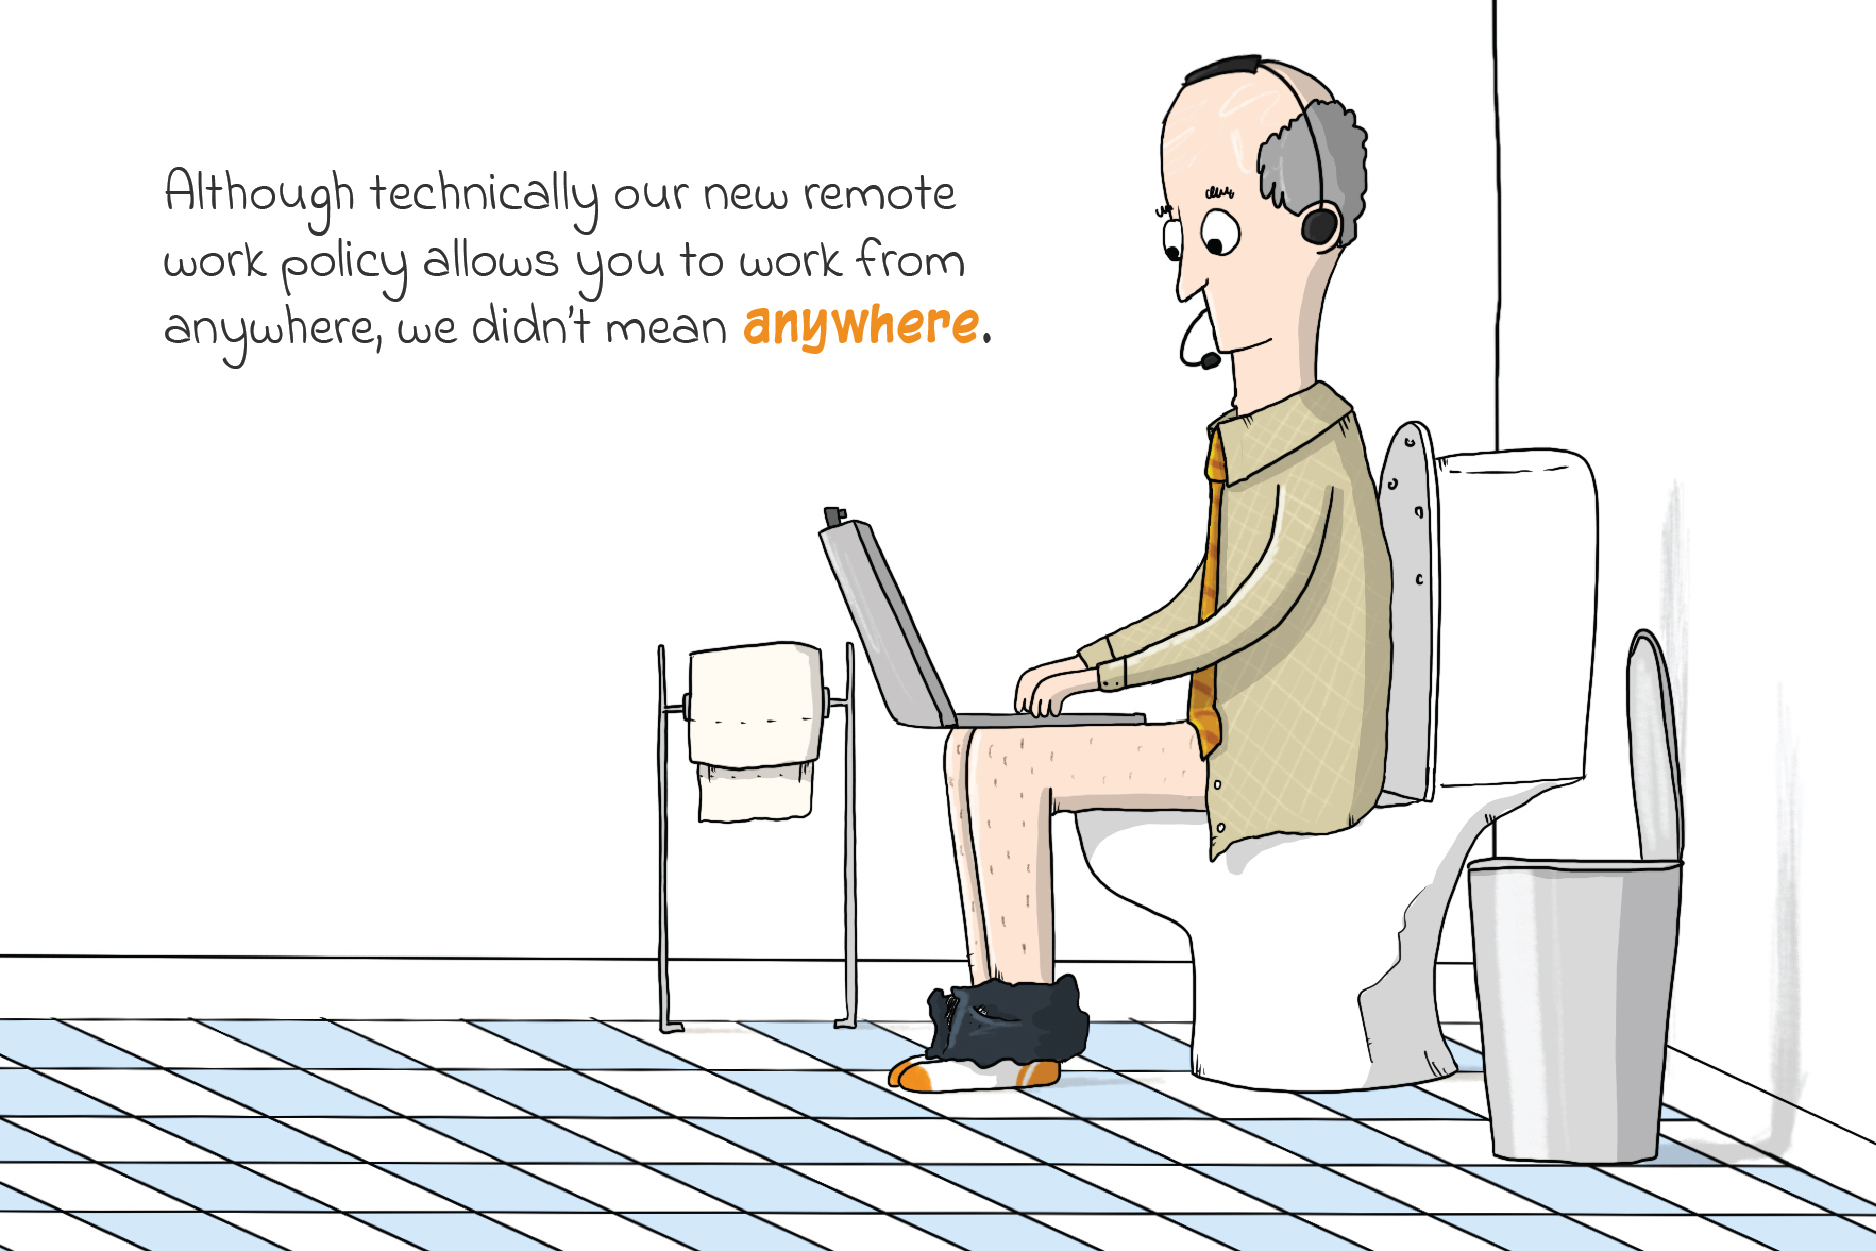 Man on toilet working, on video chat, with advice that remote work-anywhere policy should not be taken literally.